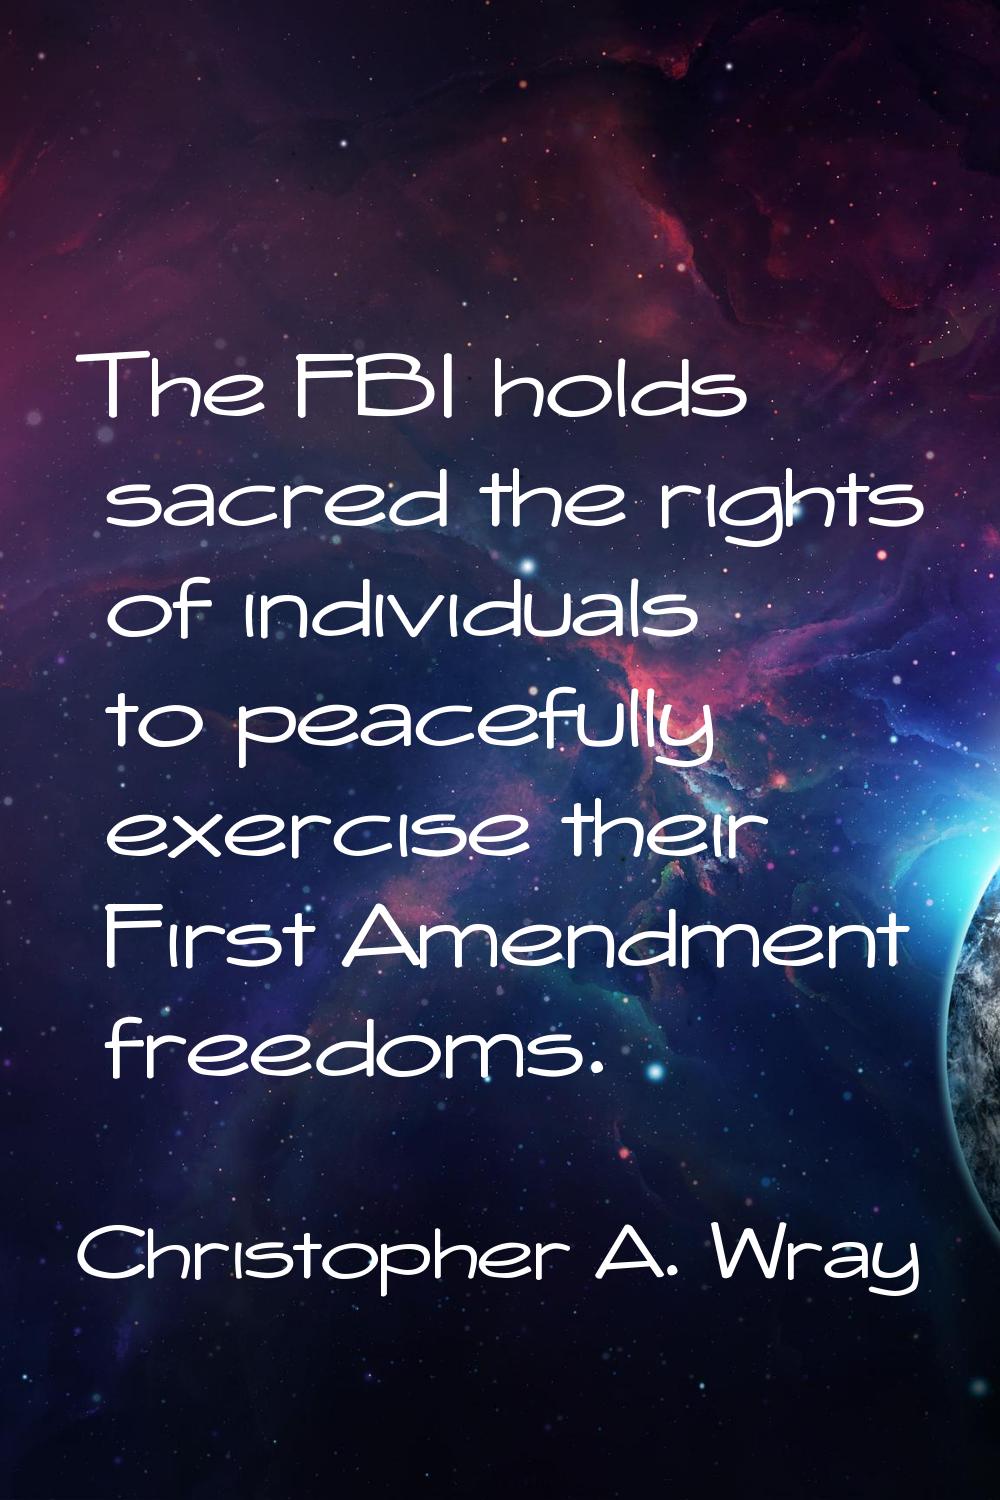 The FBI holds sacred the rights of individuals to peacefully exercise their First Amendment freedom